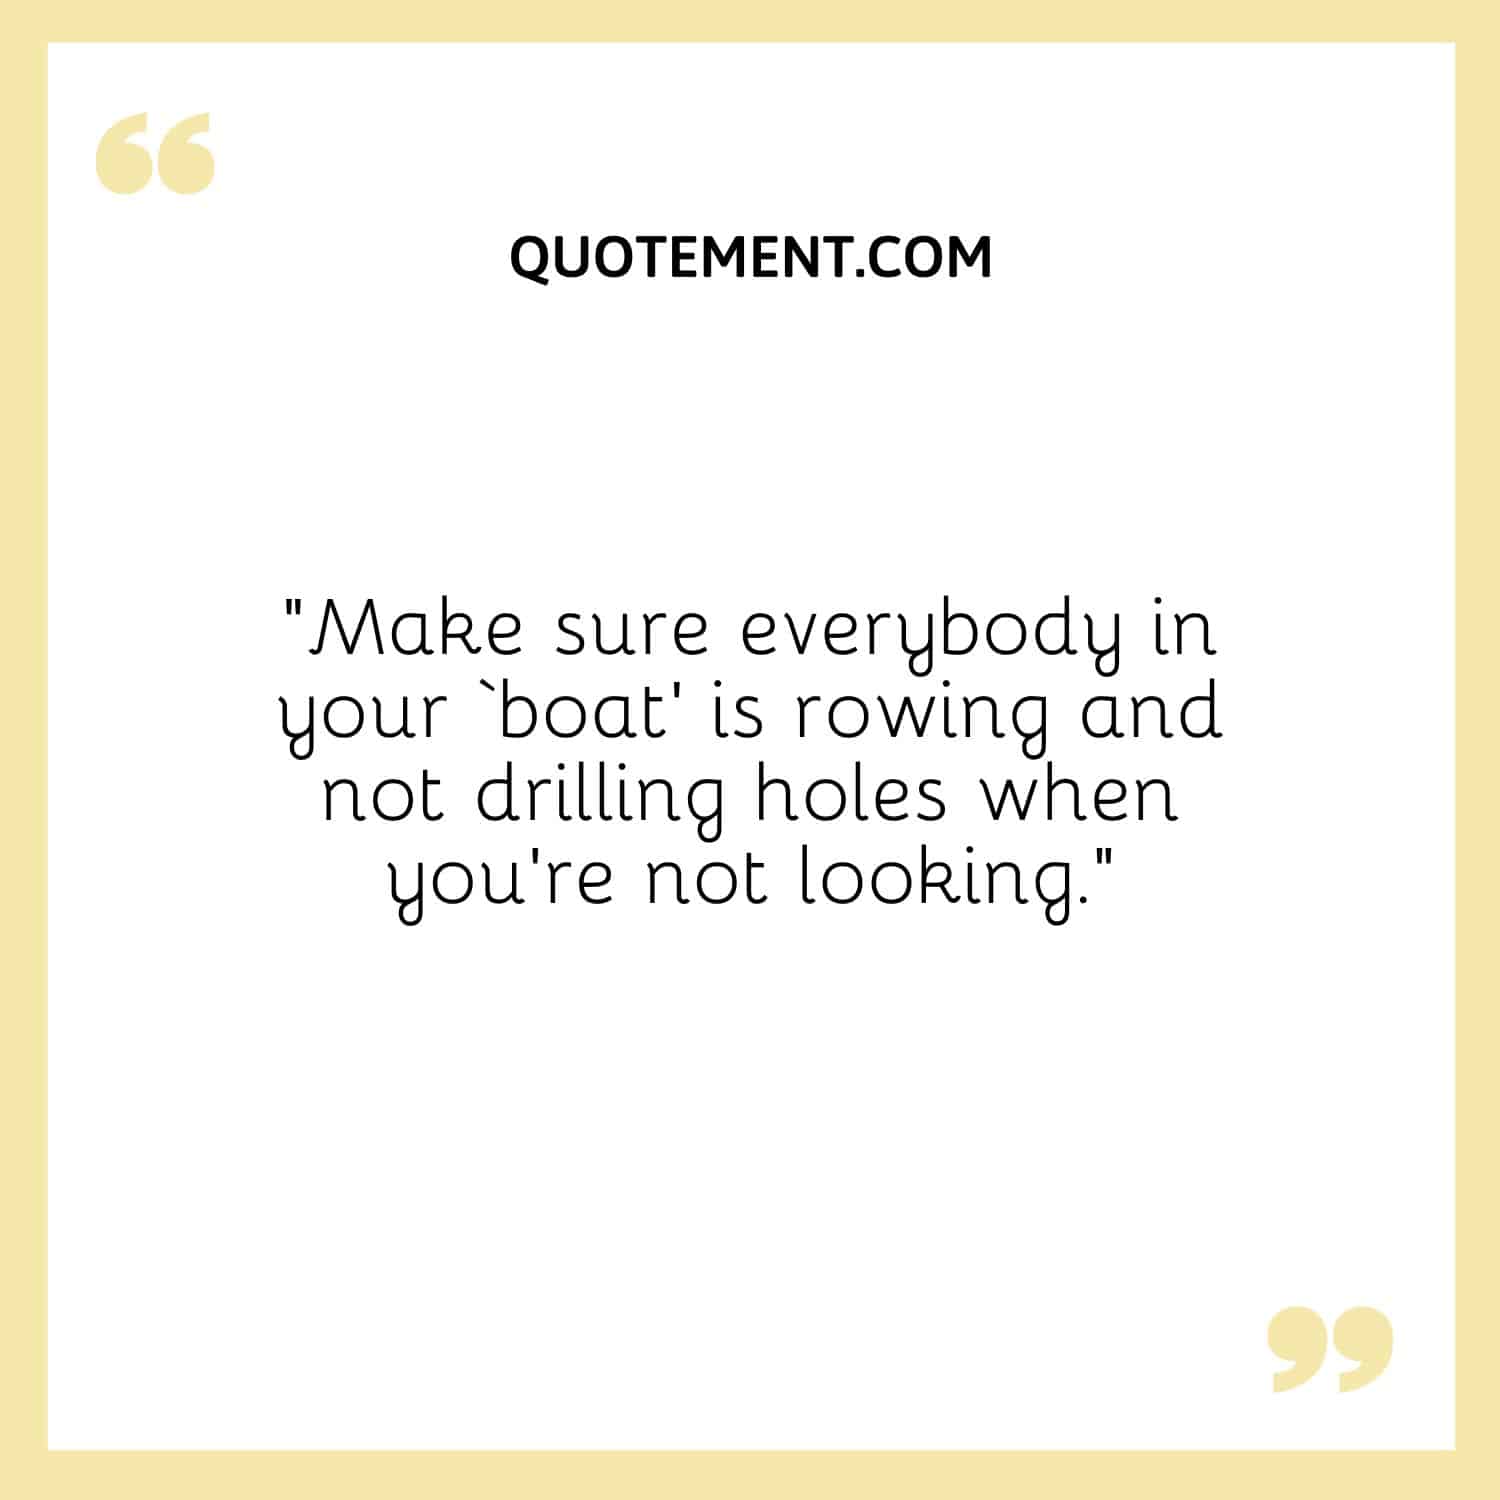 “Make sure everybody in your ‘boat’ is rowing and not drilling holes when you’re not looking.”